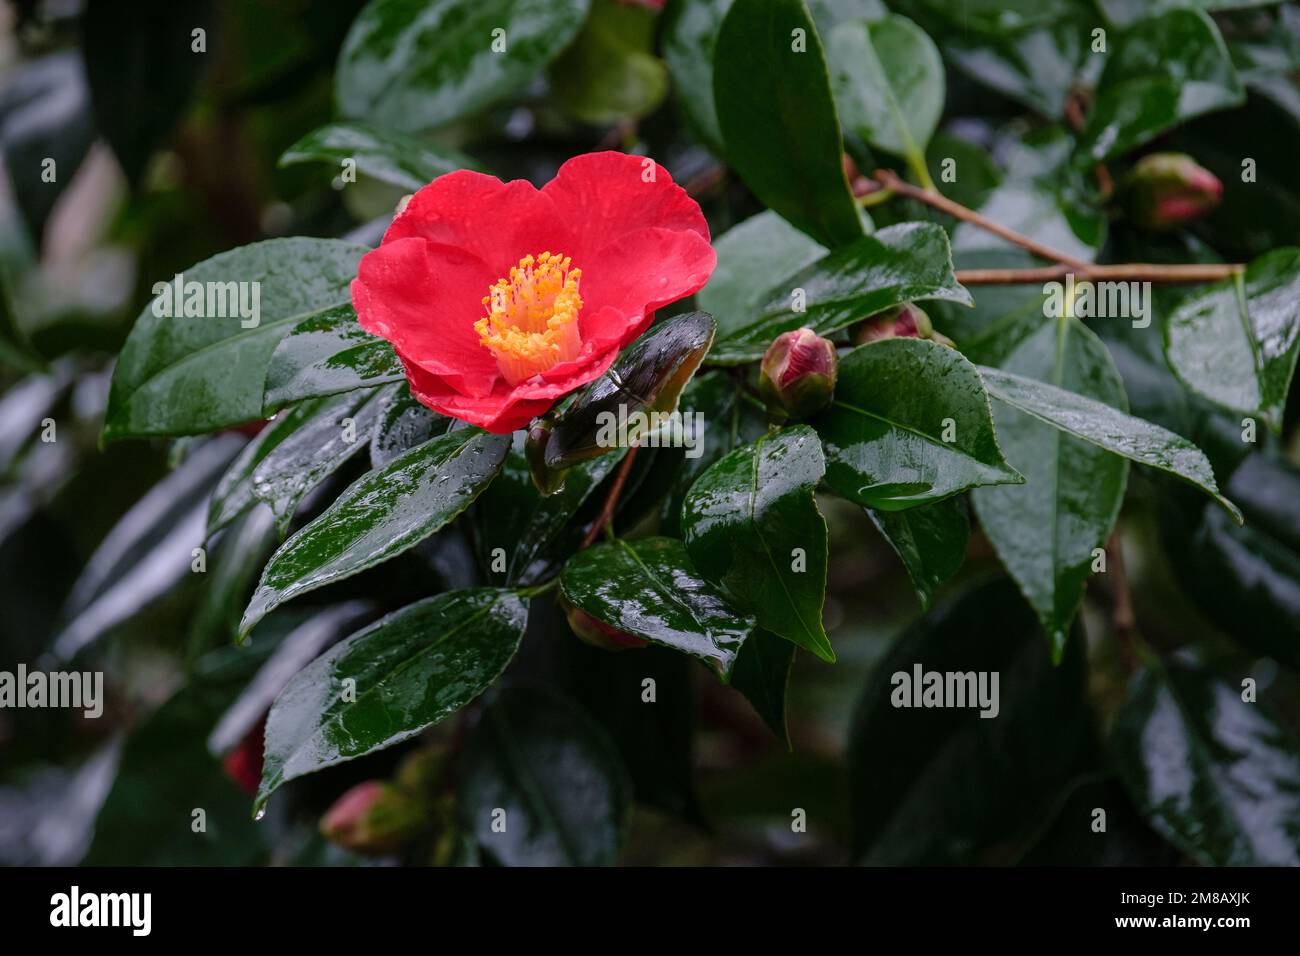 Camellia japonica Sylva, camellia Sylva, evergreen shrub with bright red single crimson flowers with yellow stamens in early spring Stock Photo